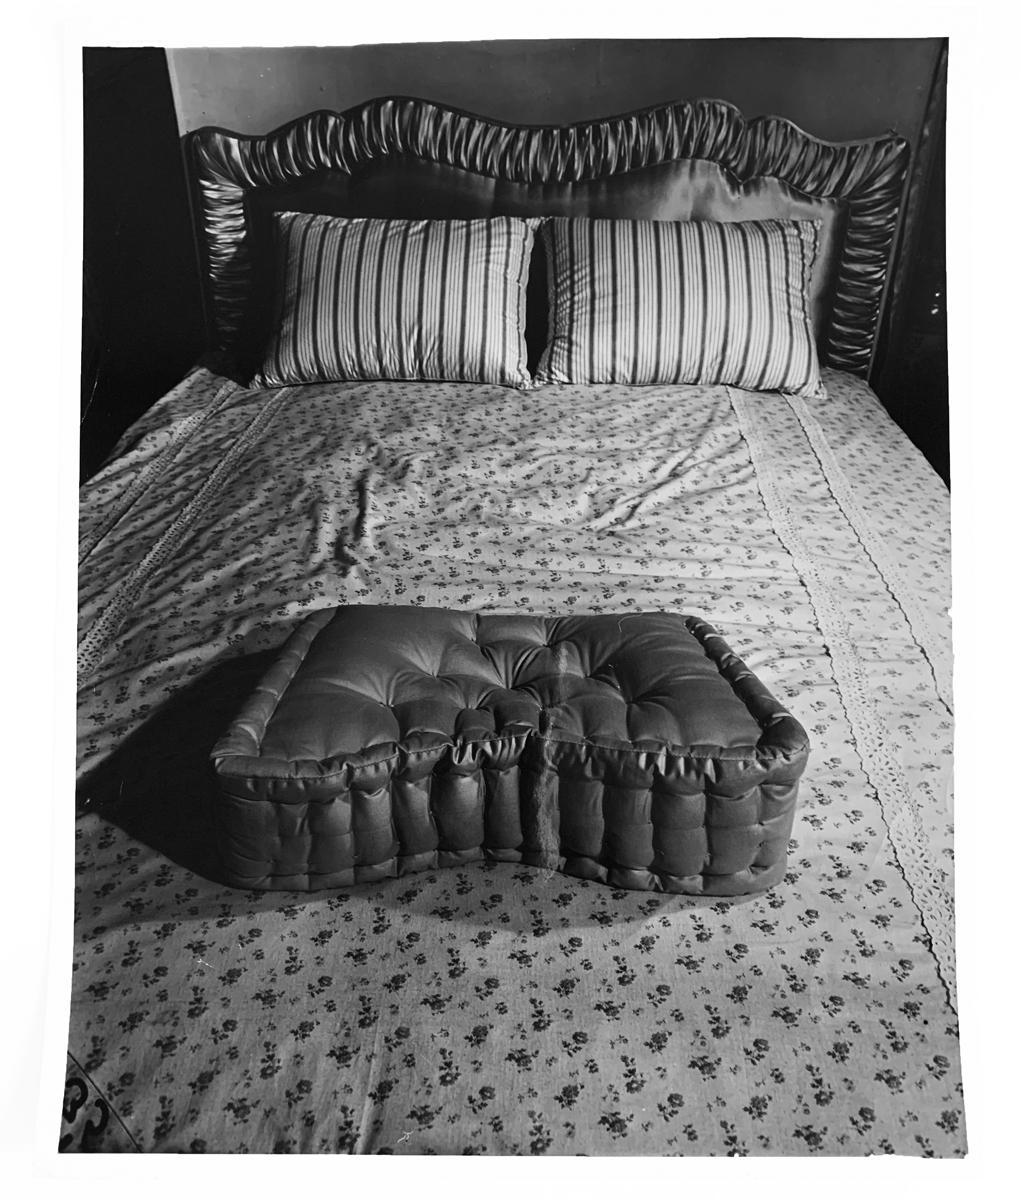 Bundling bed and pillows, c.1950-60, by Weegee -- paper size: 14" x 11" and image size: 13 1⁄2" x 10 5⁄8" -- is a gelatin silver print with Weegee's copyright stamp on back of photo. Weegee, who shot film using a Speed Graphic 4 x 5 camera, learned